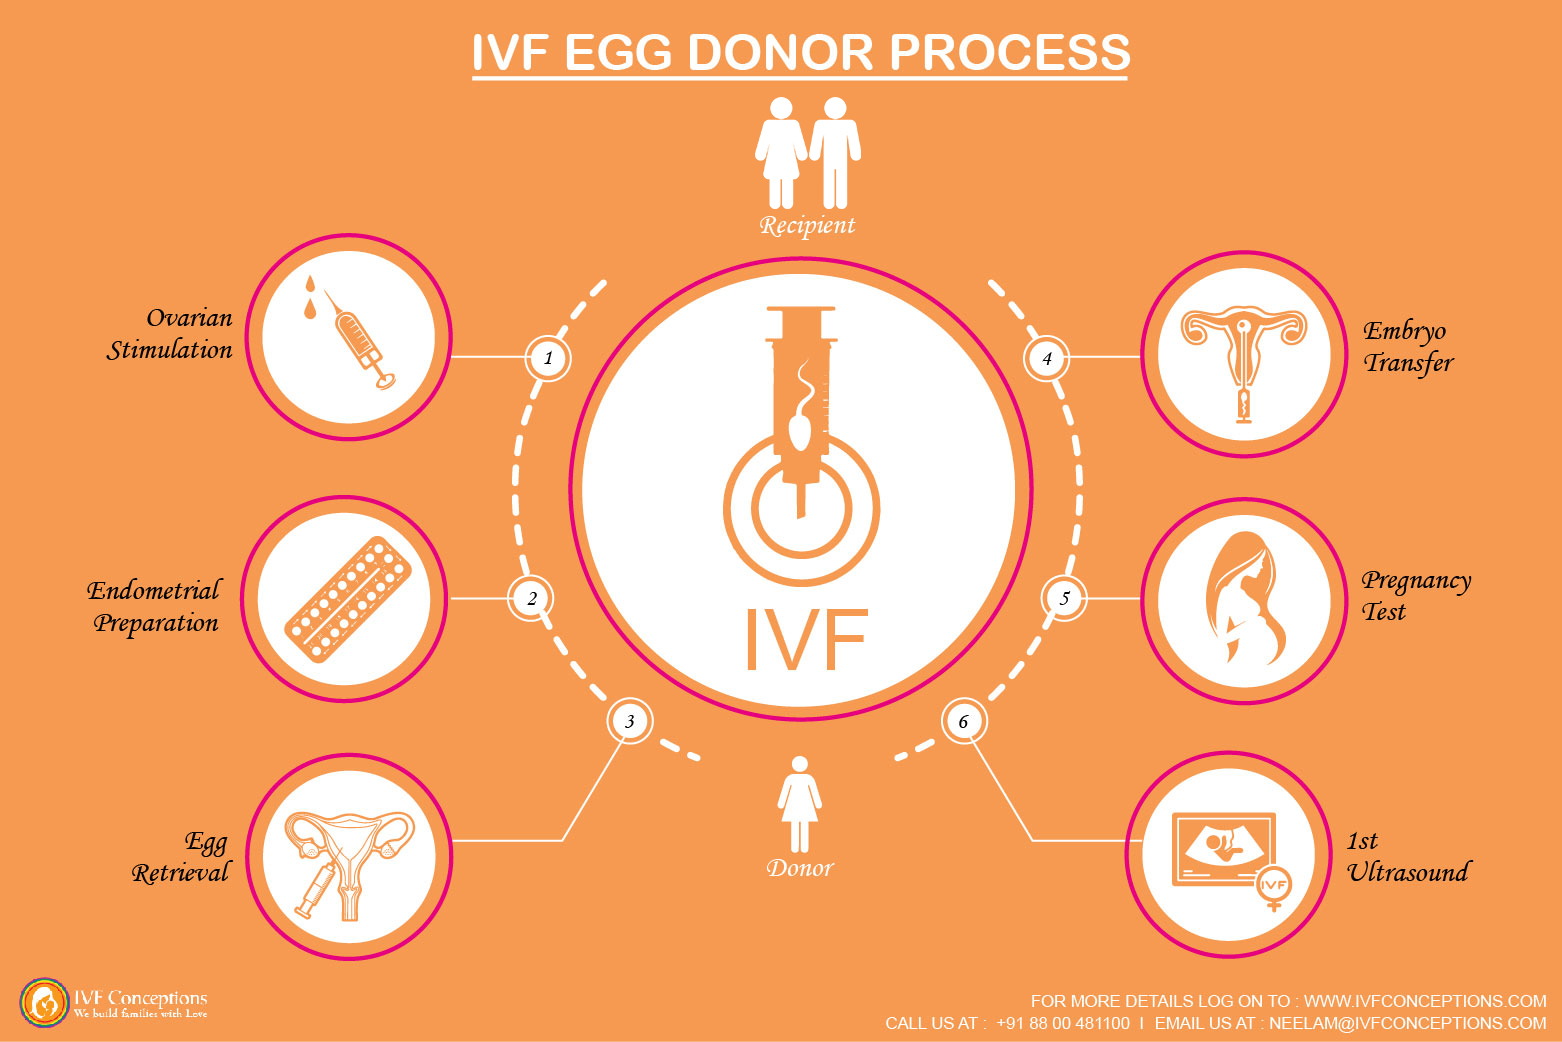 Infographic: How does IVF egg donor process work?